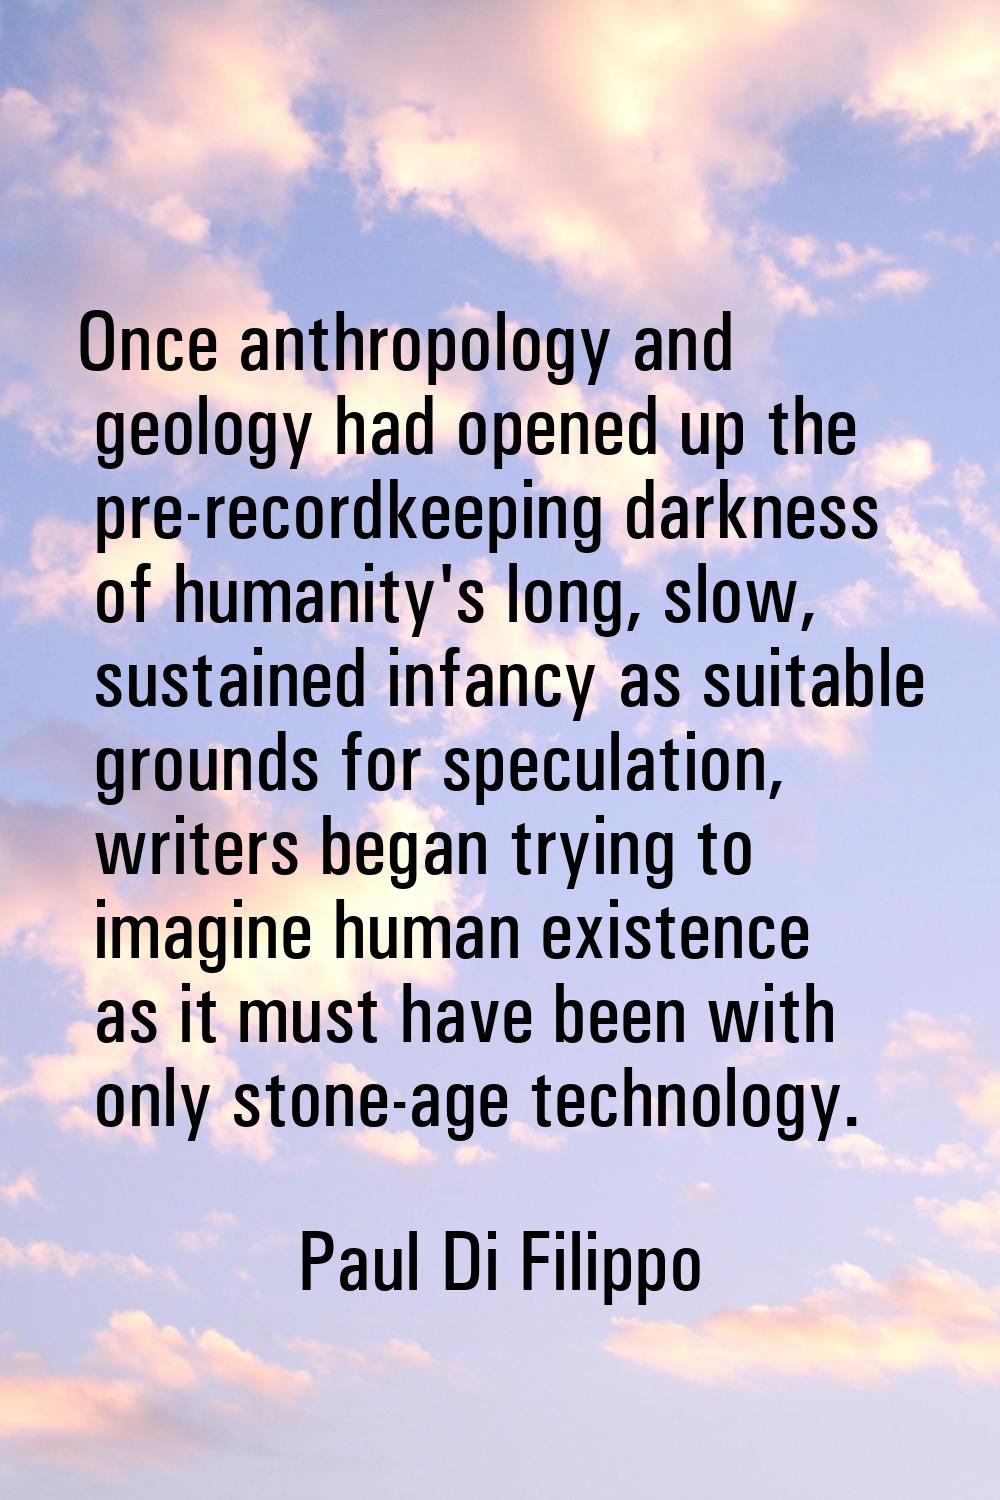 Once anthropology and geology had opened up the pre-recordkeeping darkness of humanity's long, slow